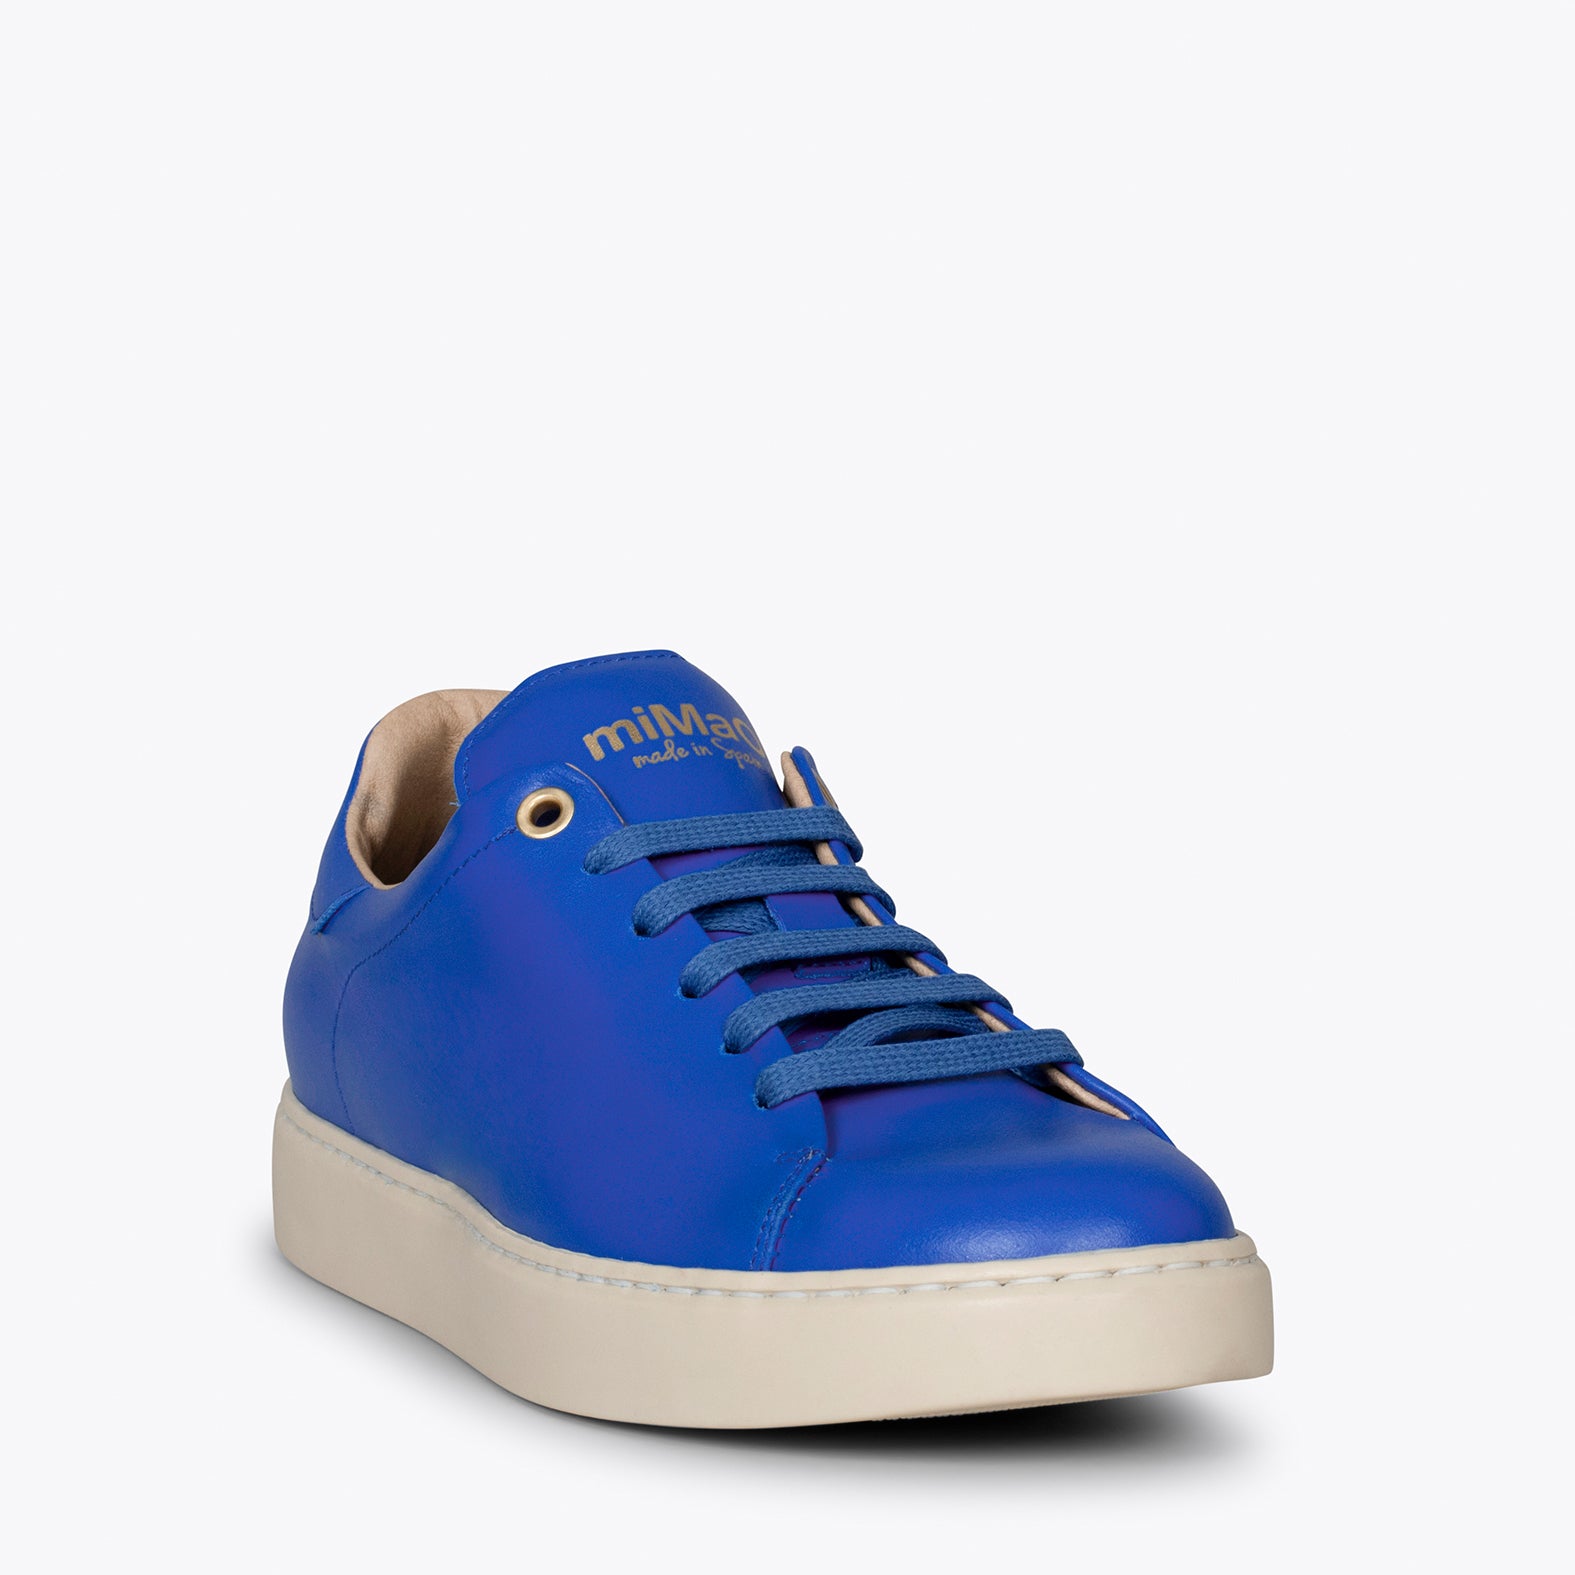 SKATE – ELECTRIC BLUE casual leather sneaker